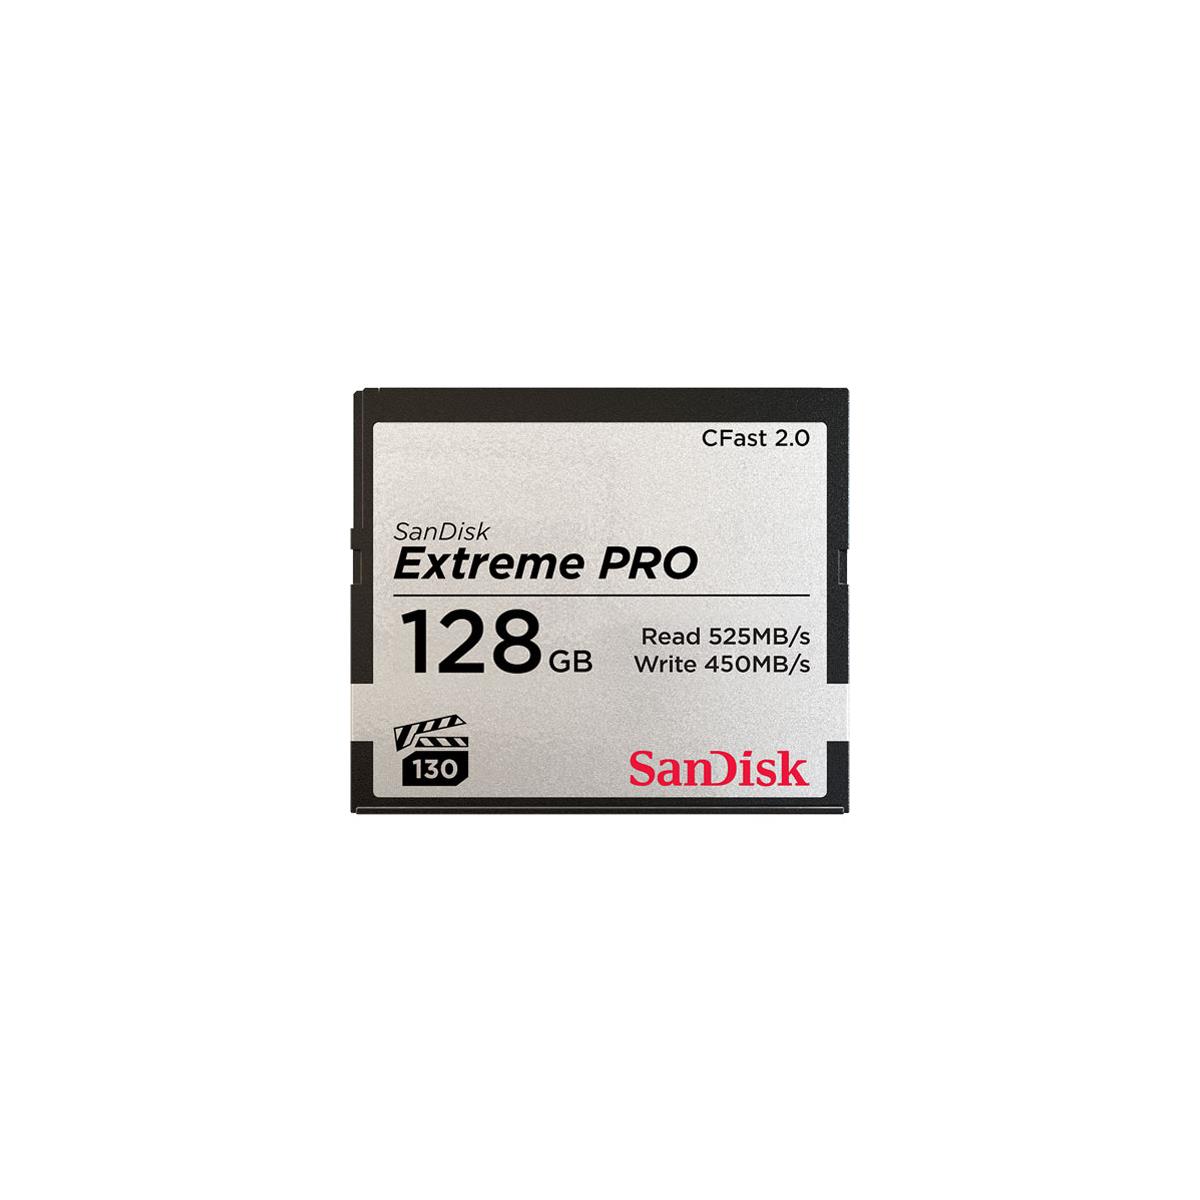 Image of SanDisk Extreme PRO 128GB CFast 2.0 Memory Card